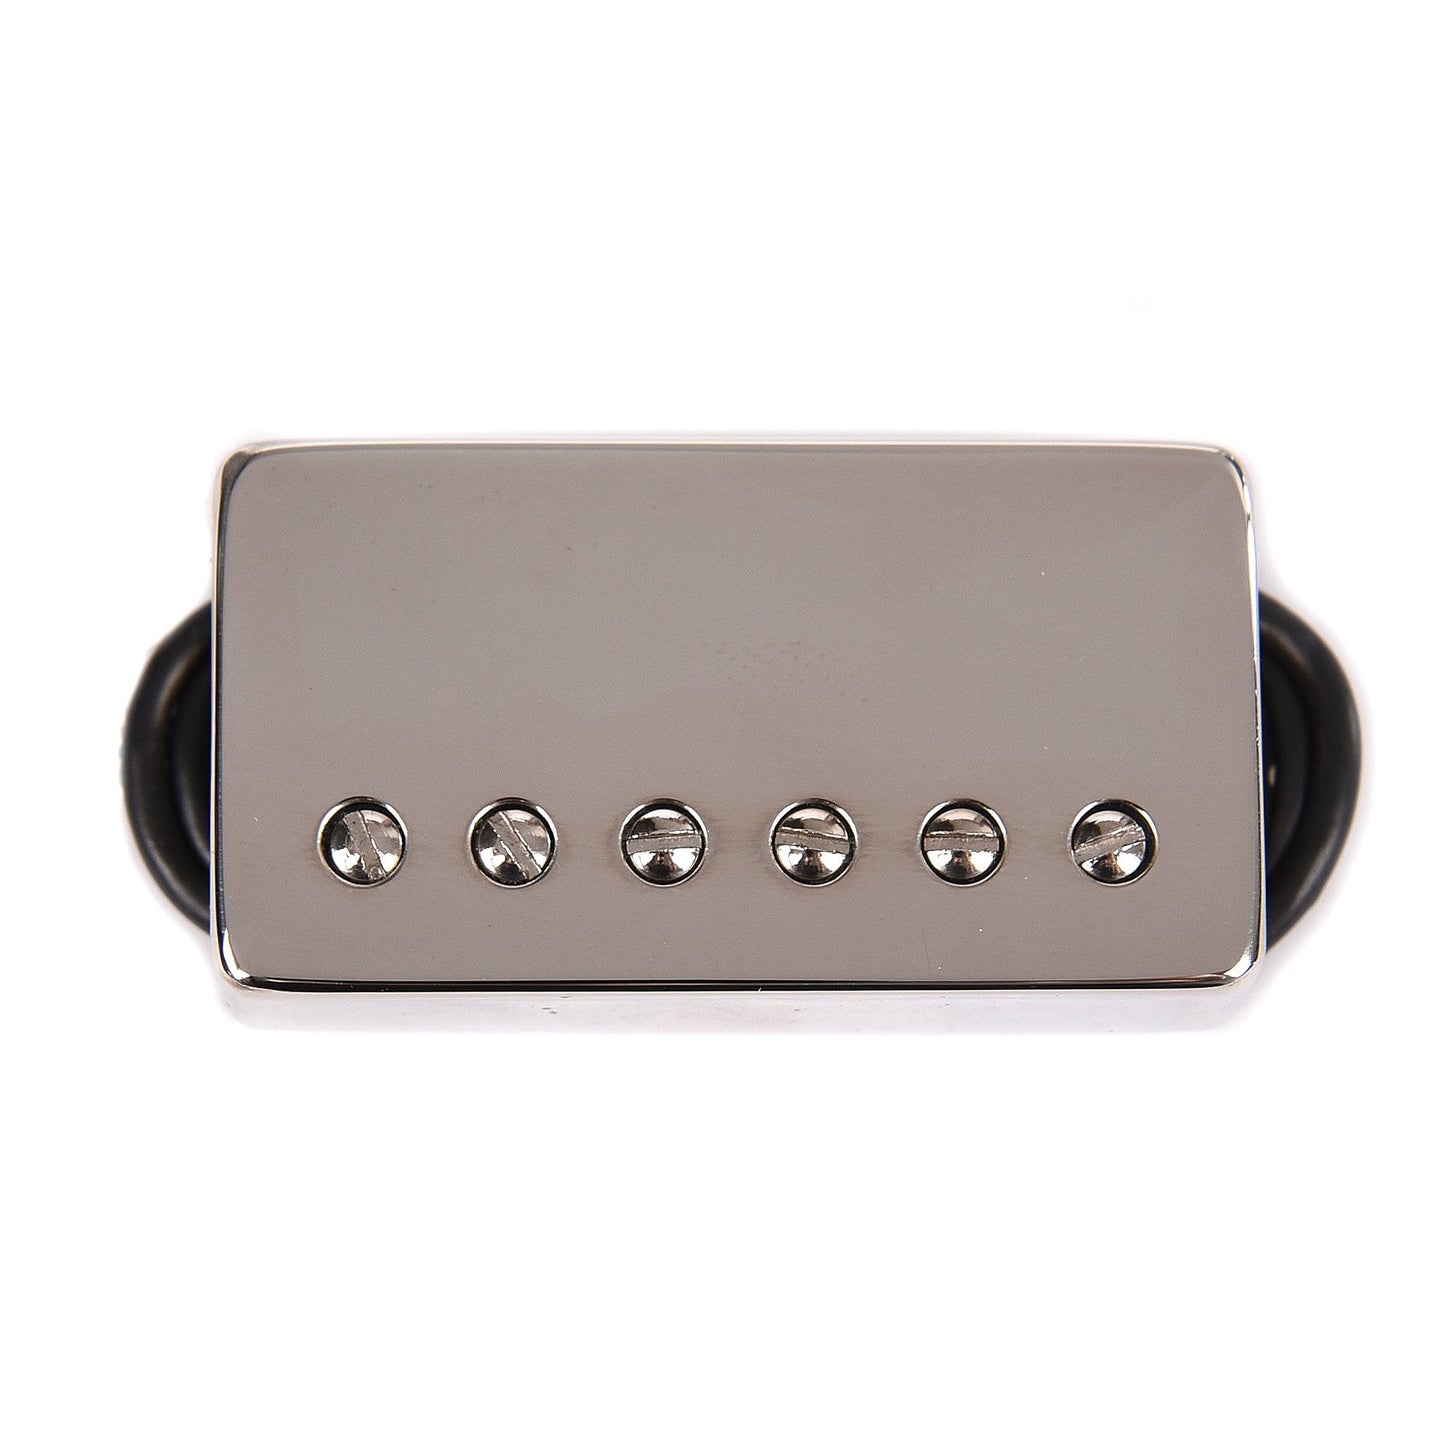 Bare Knuckle Bootcamp Humbucker Old Guard Neck 6-String 50mm Nickel Parts / Guitar Pickups